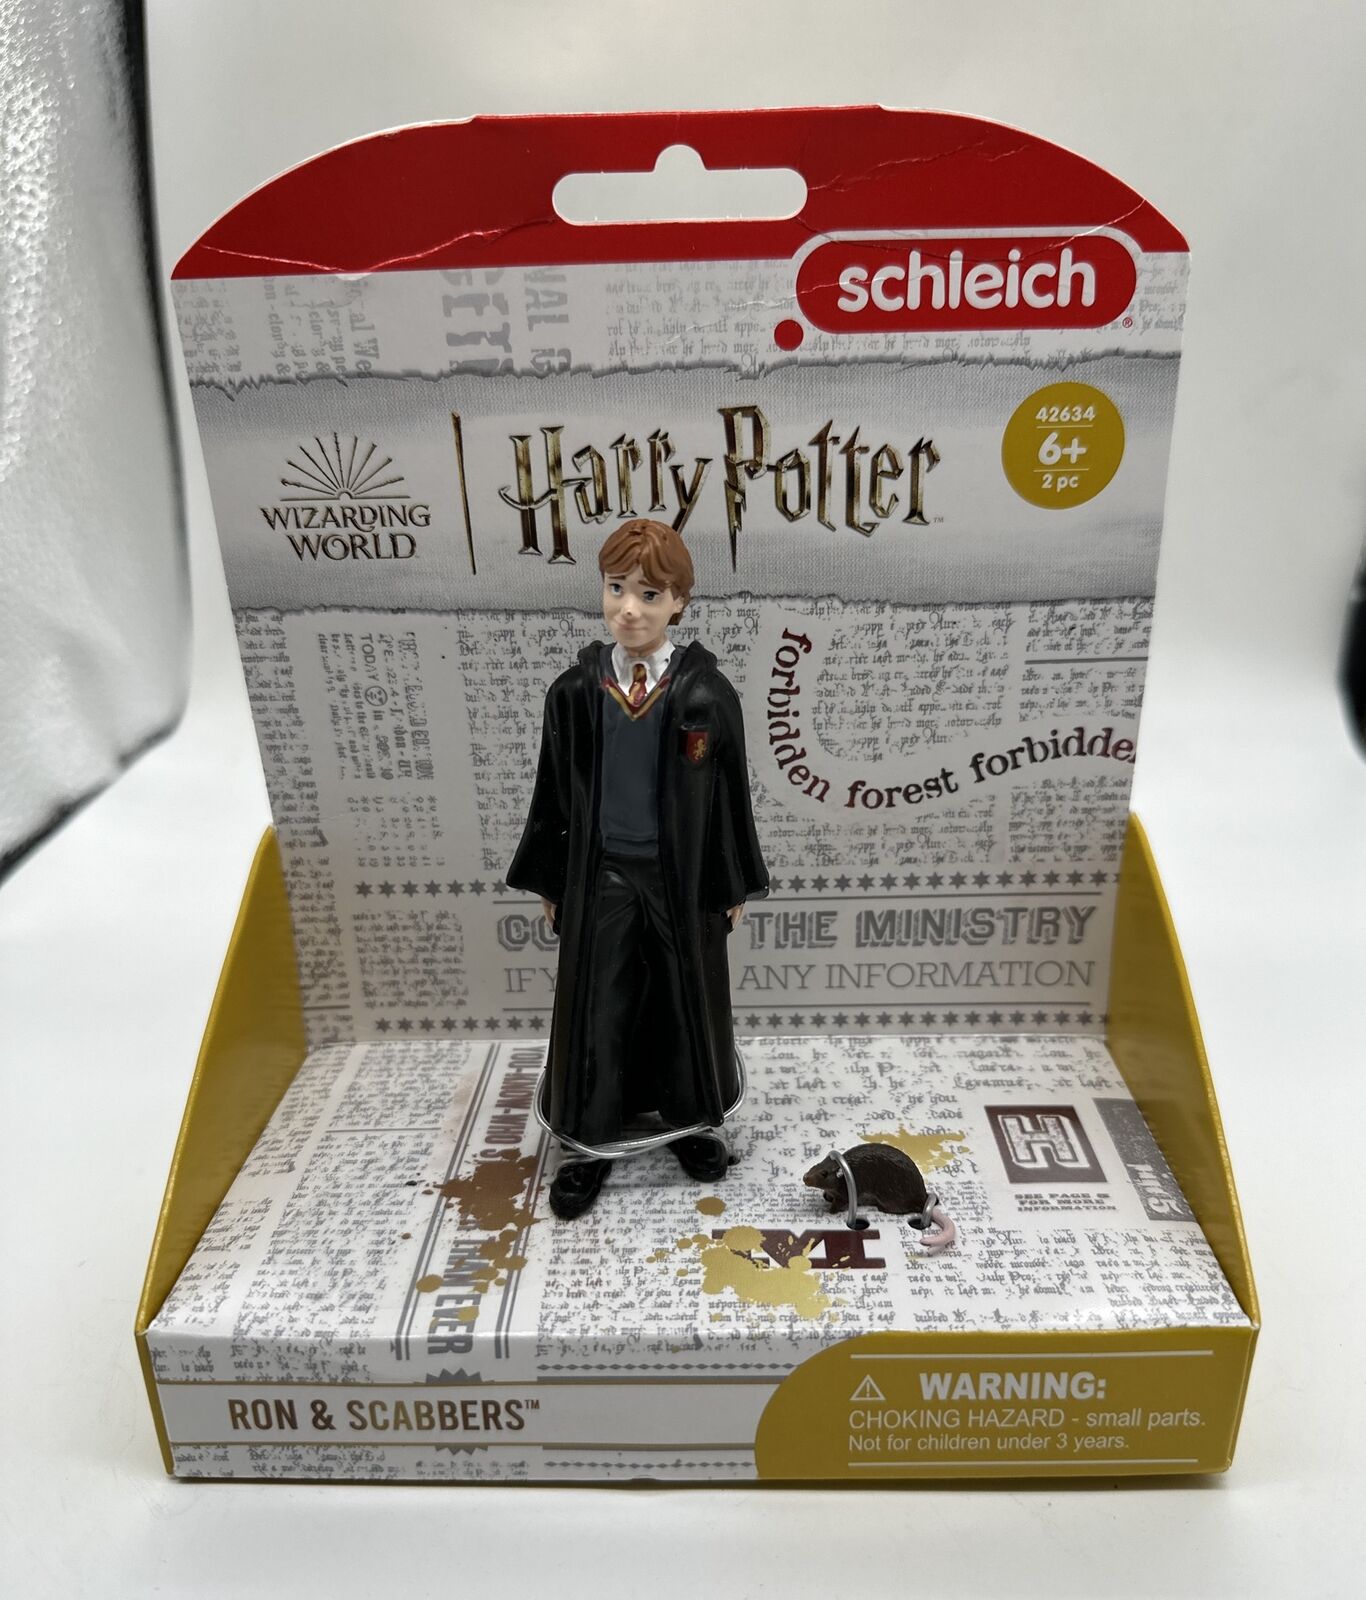 Schleich Wizarding World of Harry Potter 2-Piece Set with Ron Weasley & Scabbers